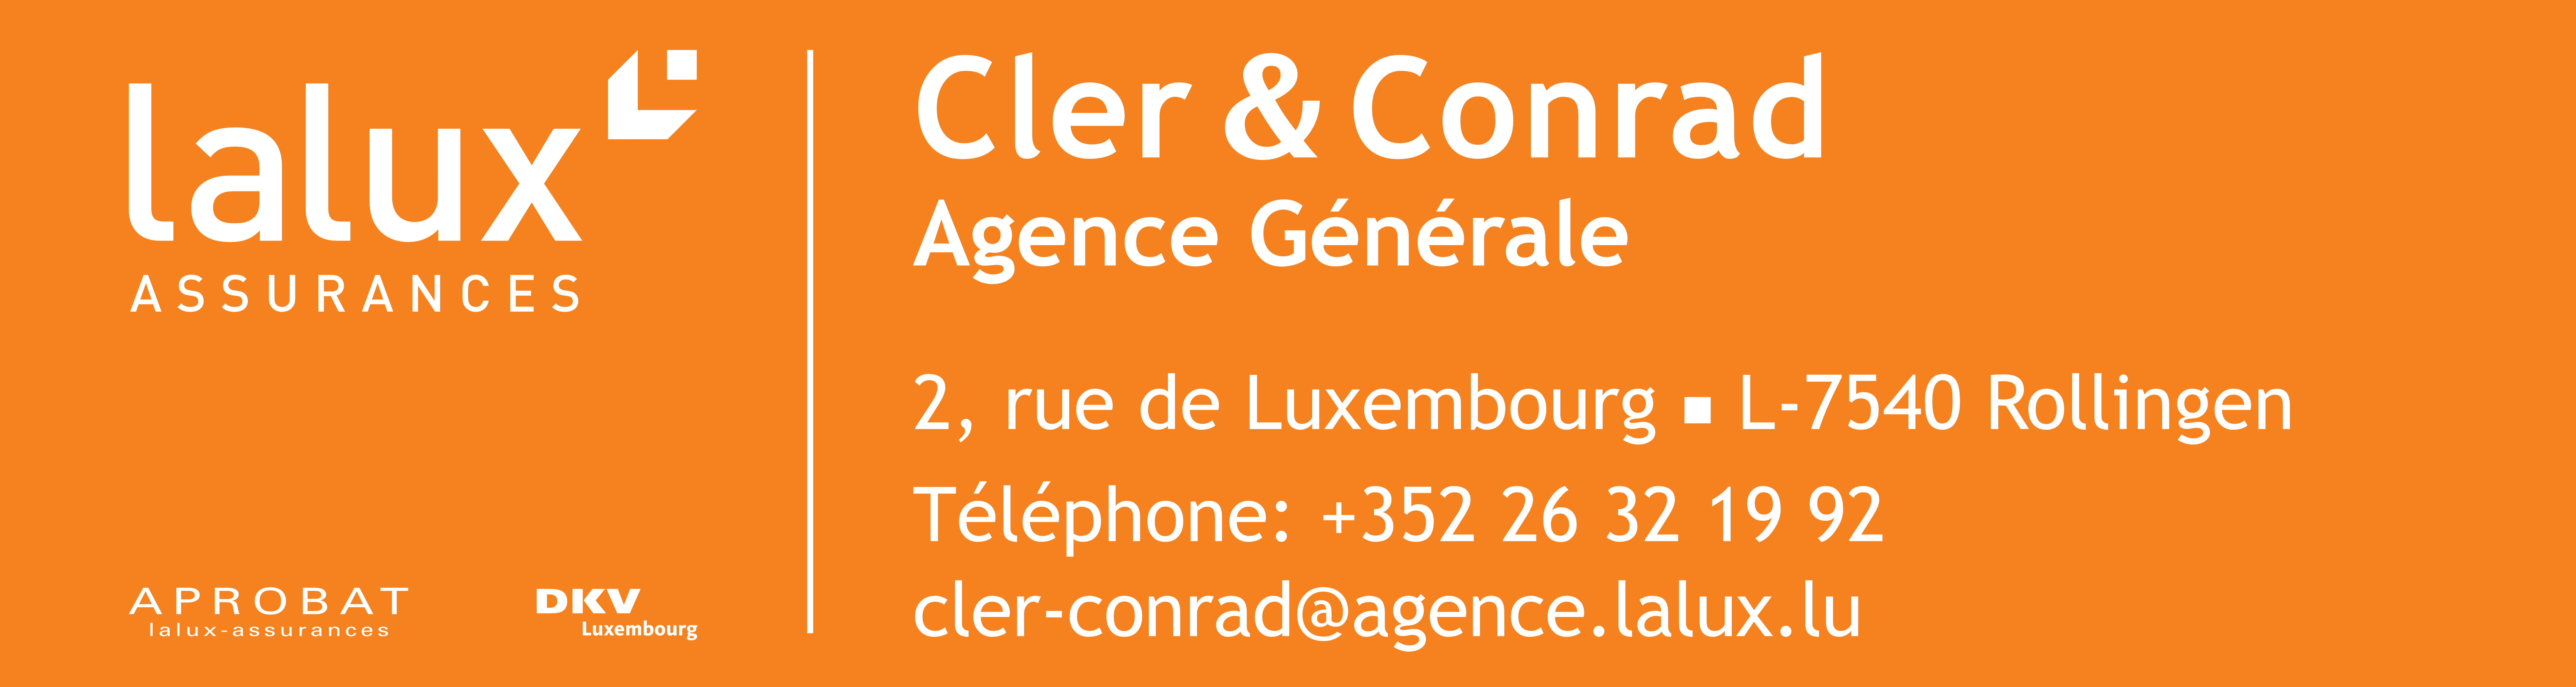 Luxembourgeoise Cler an Conrad